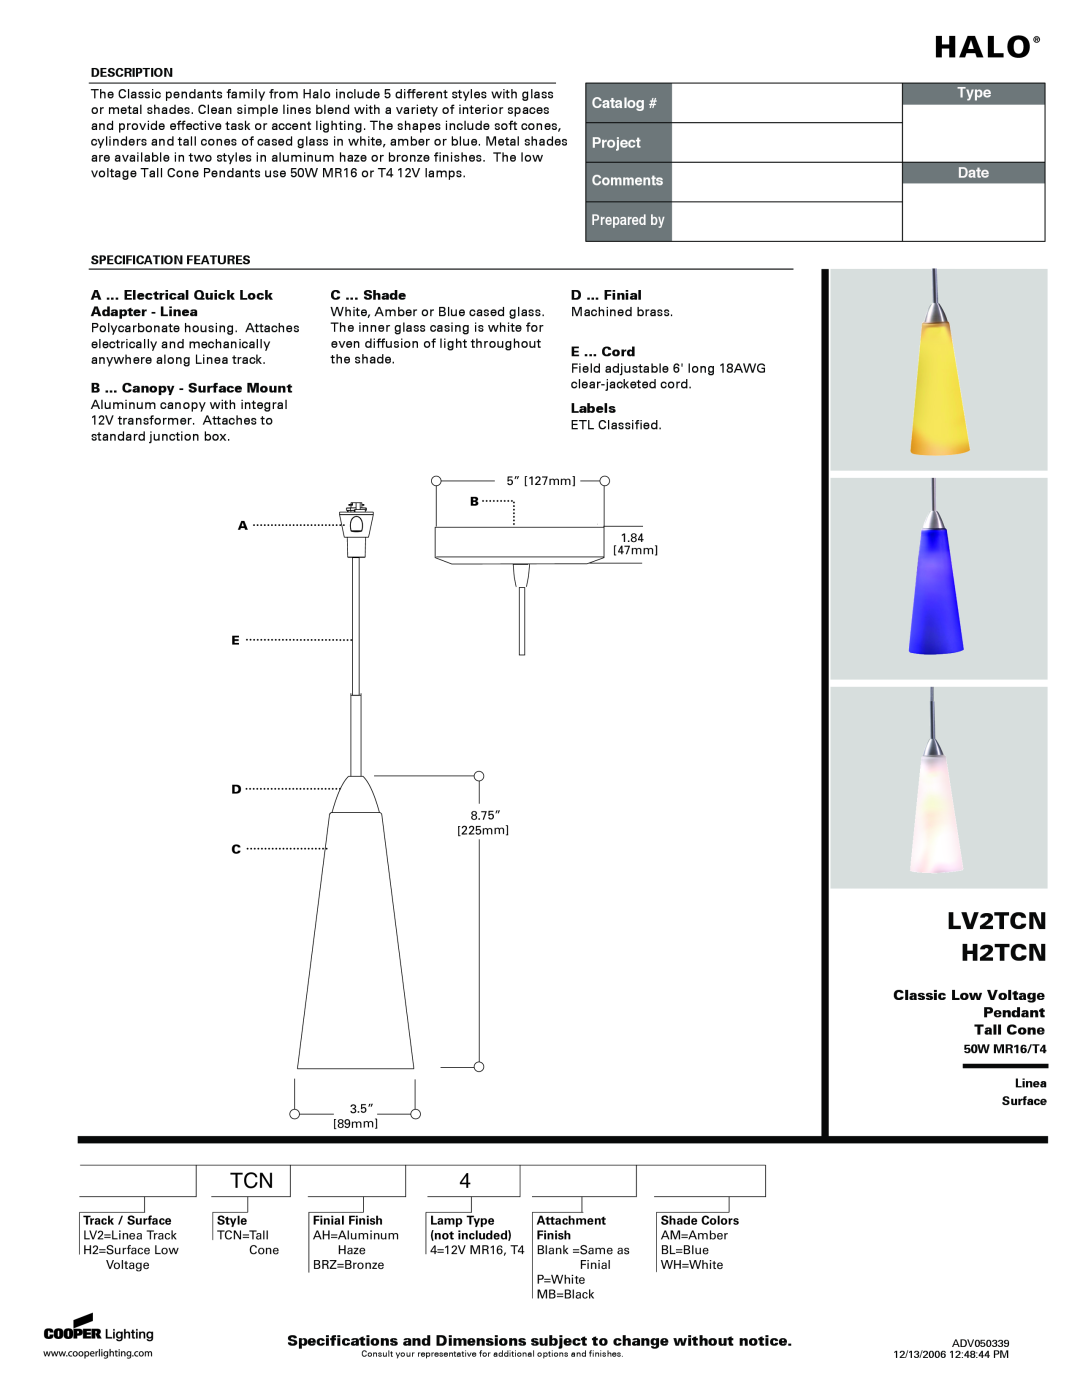 Cooper Lighting specifications Halo, LV2TCN, Classic H2TCN Low Voltage, Tall Cone Pendant, Catalog #, Project Comments 